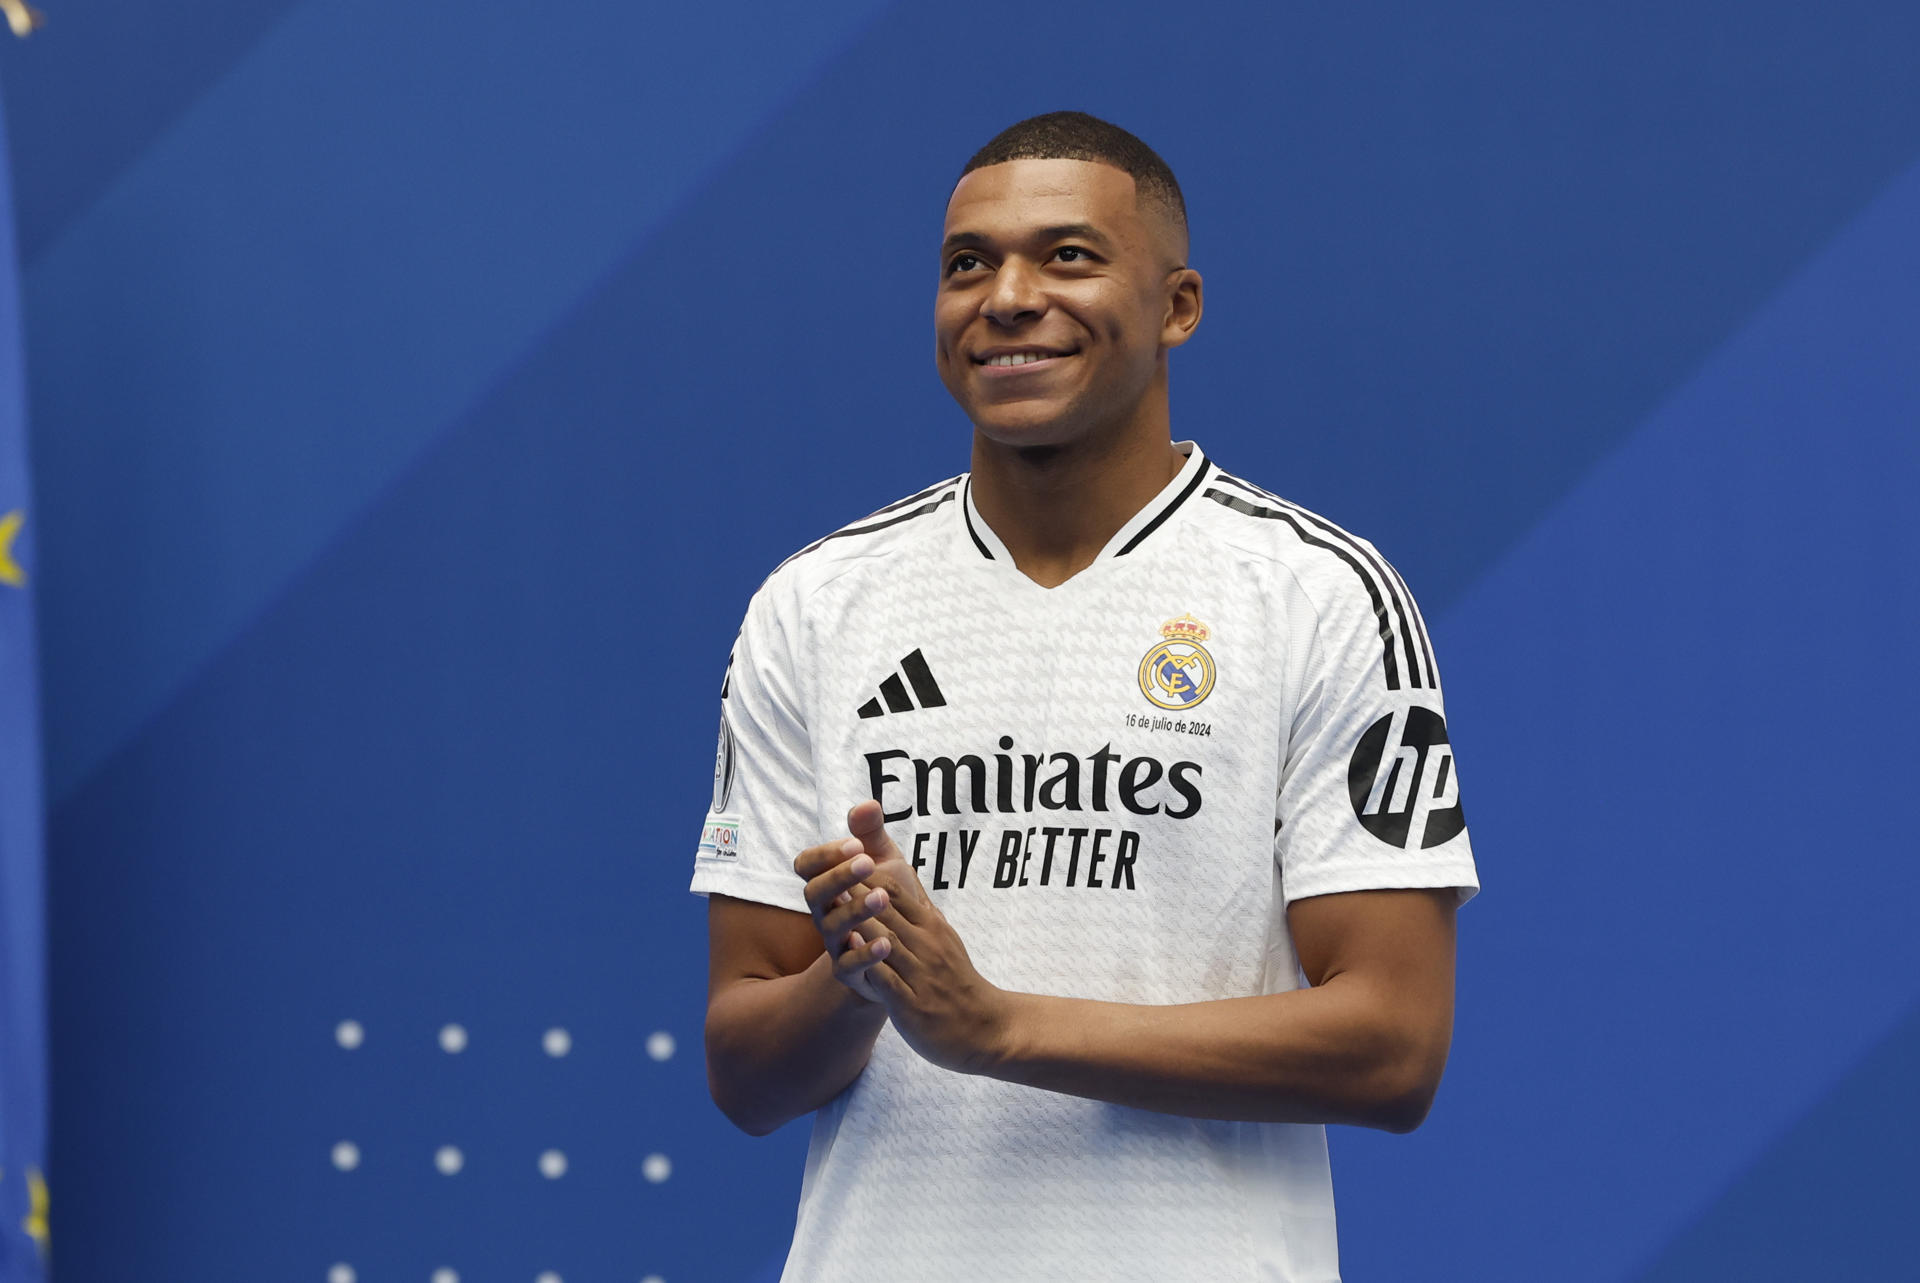 Mbappé lands at Real: “I will give my life for this club, the best in the world”